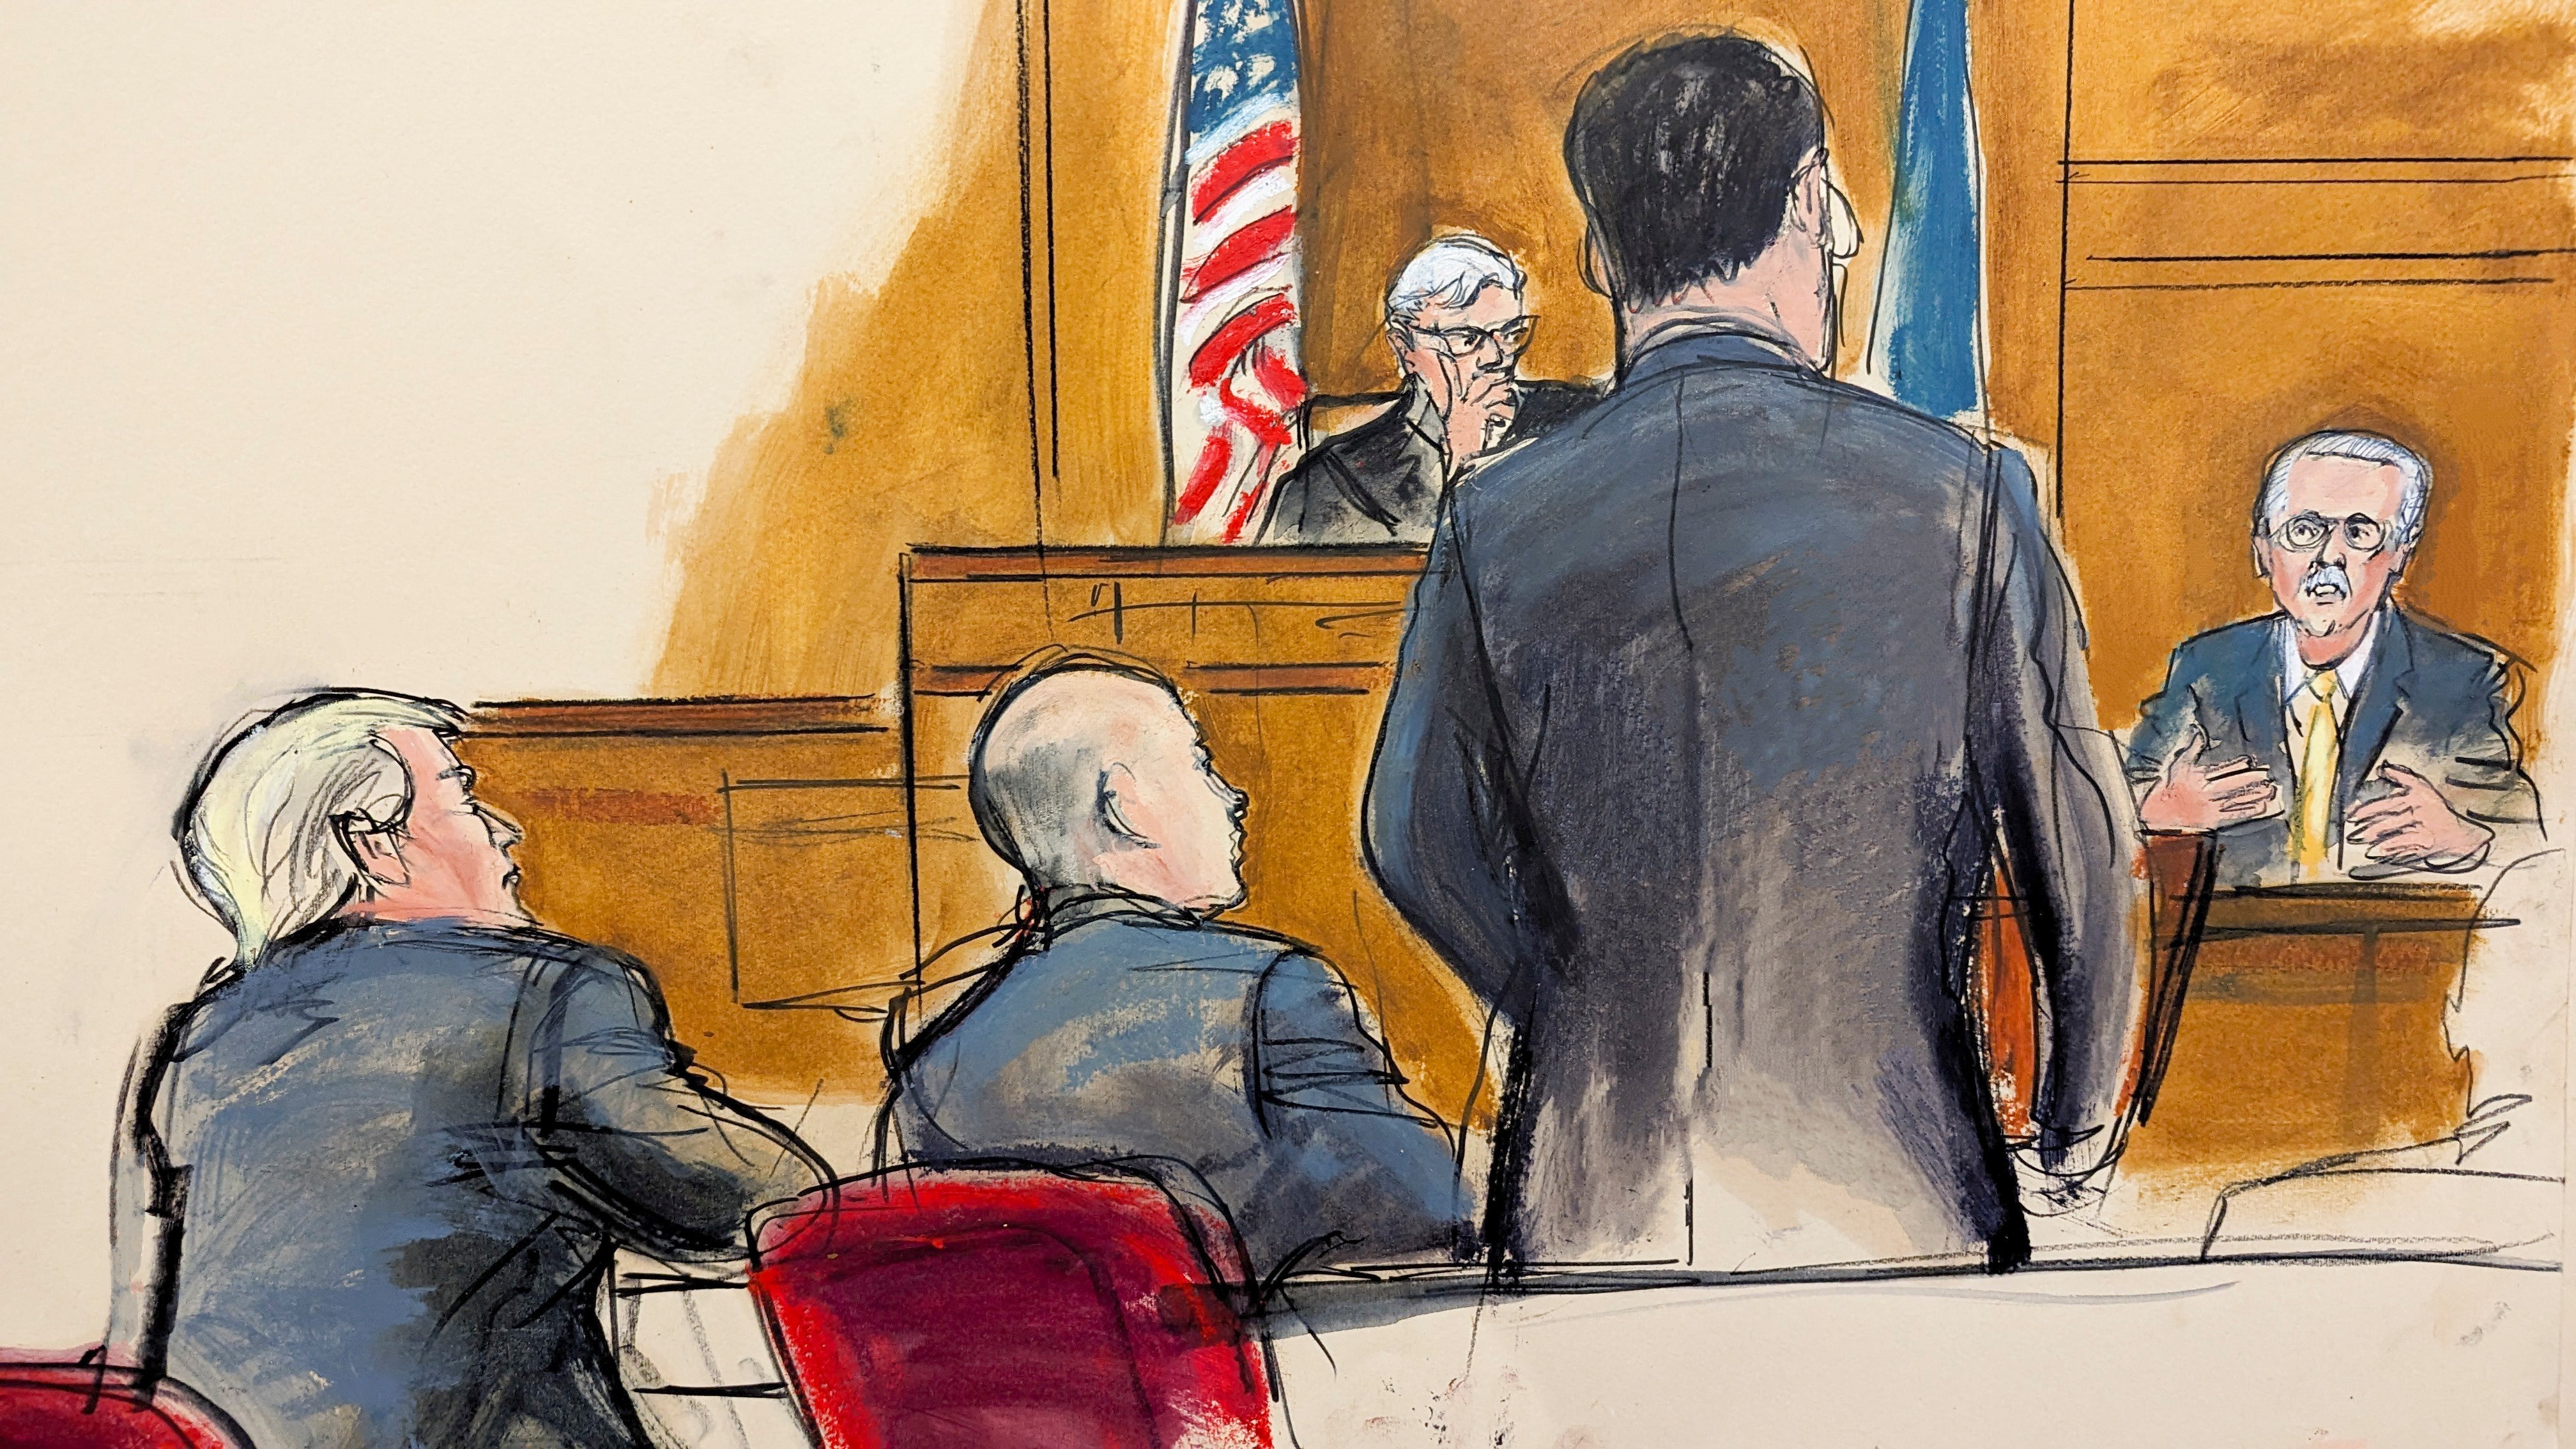 Pecker being questioned on the stand